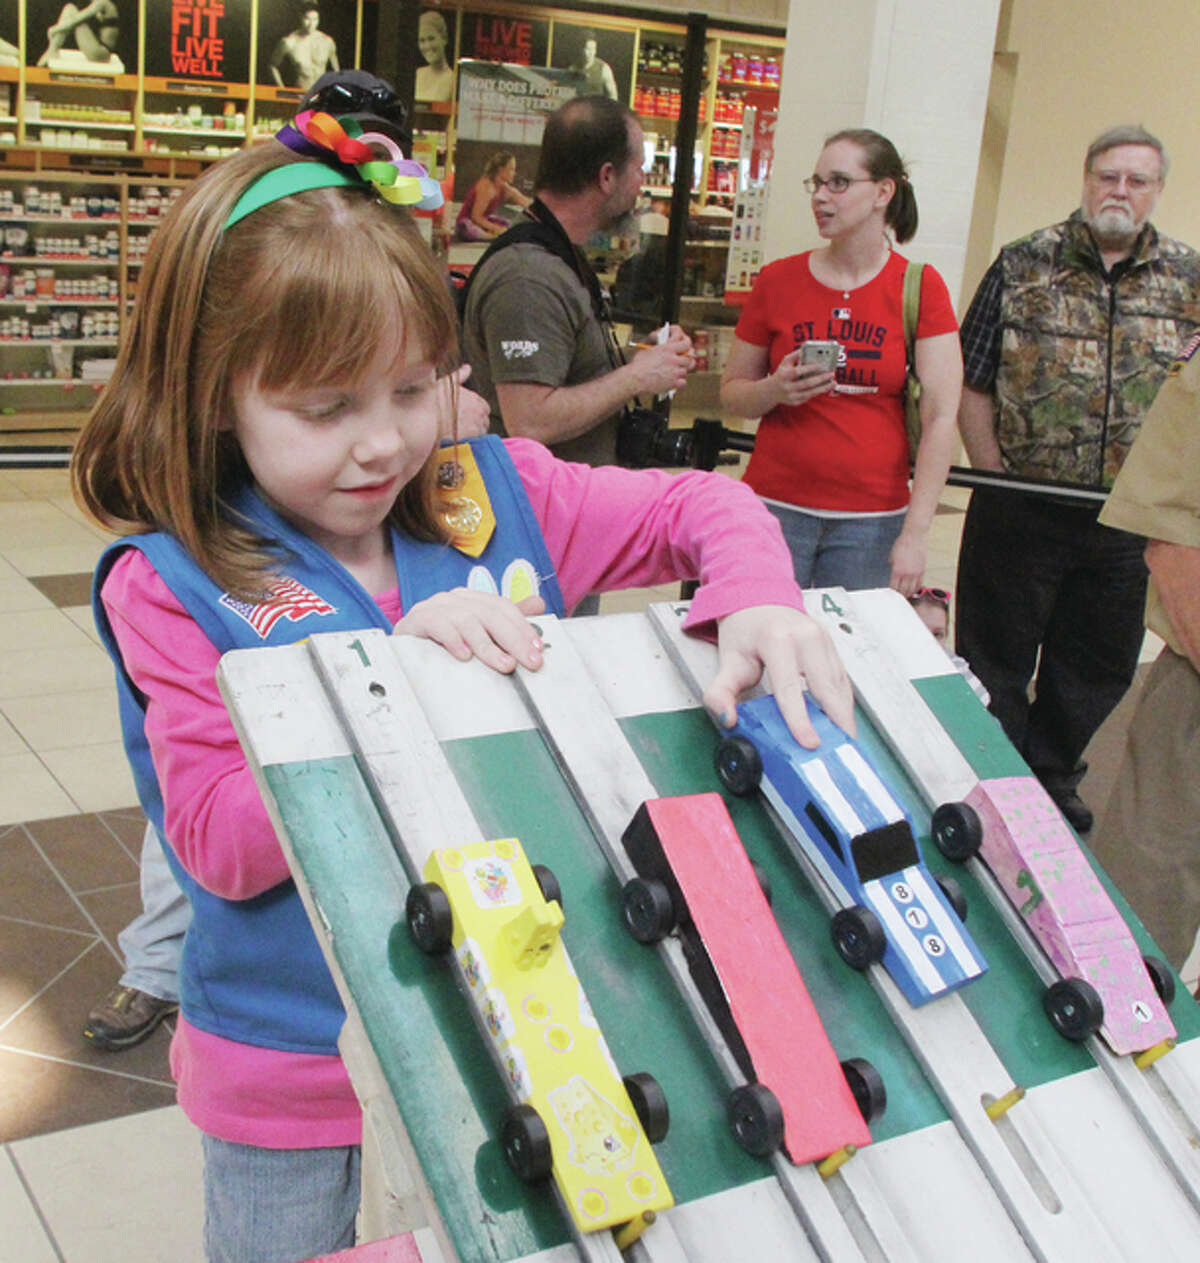 Alexis Peal sets up her pinewood derby car up for racing Saturday at Alton Square.